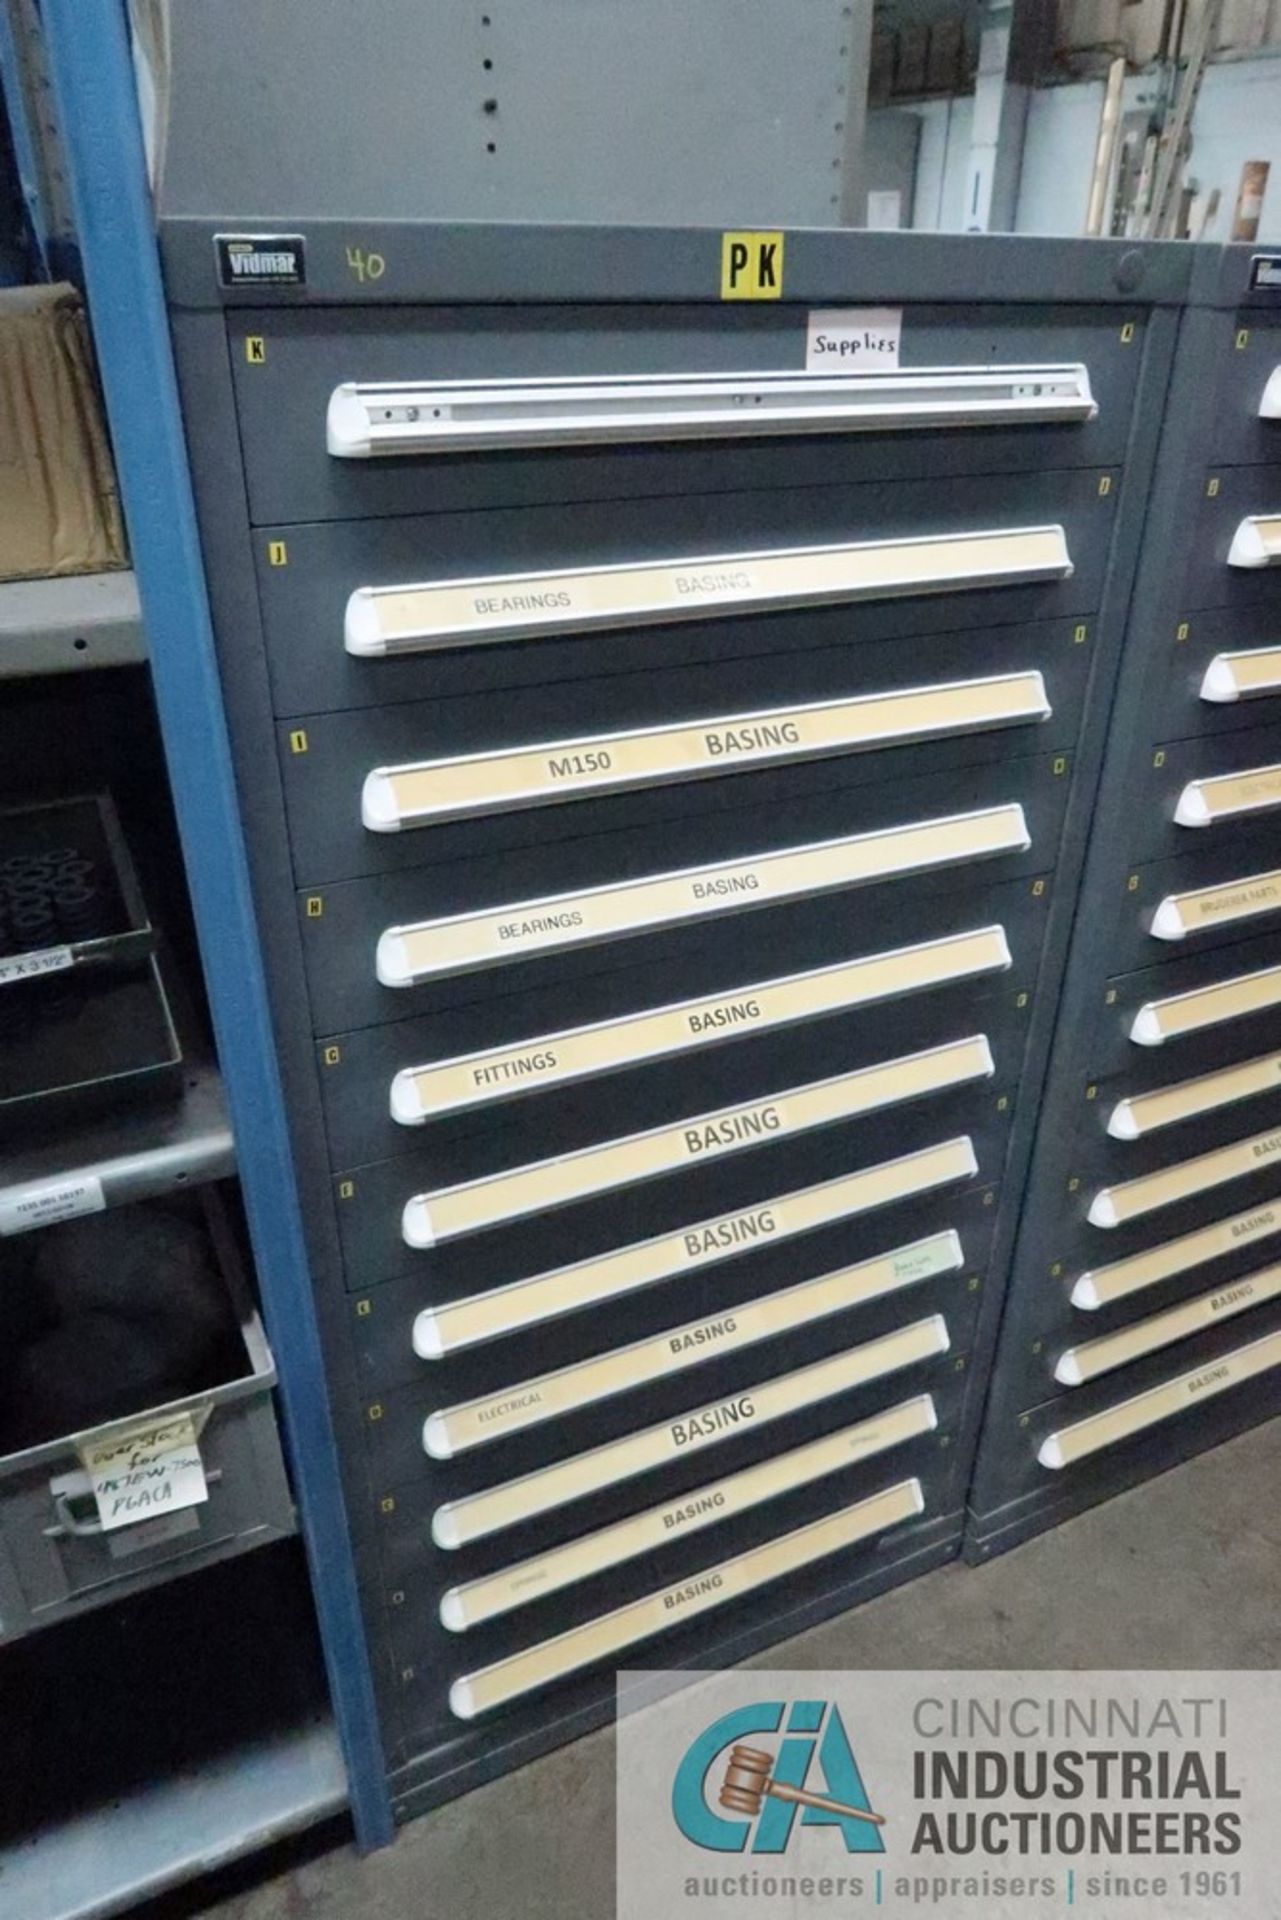 11-DRAWER VIDMAR CABINET WITH CONTENTS INCLUDING MISCELLANEOUS BASING BEARINGS, FITTINGS,